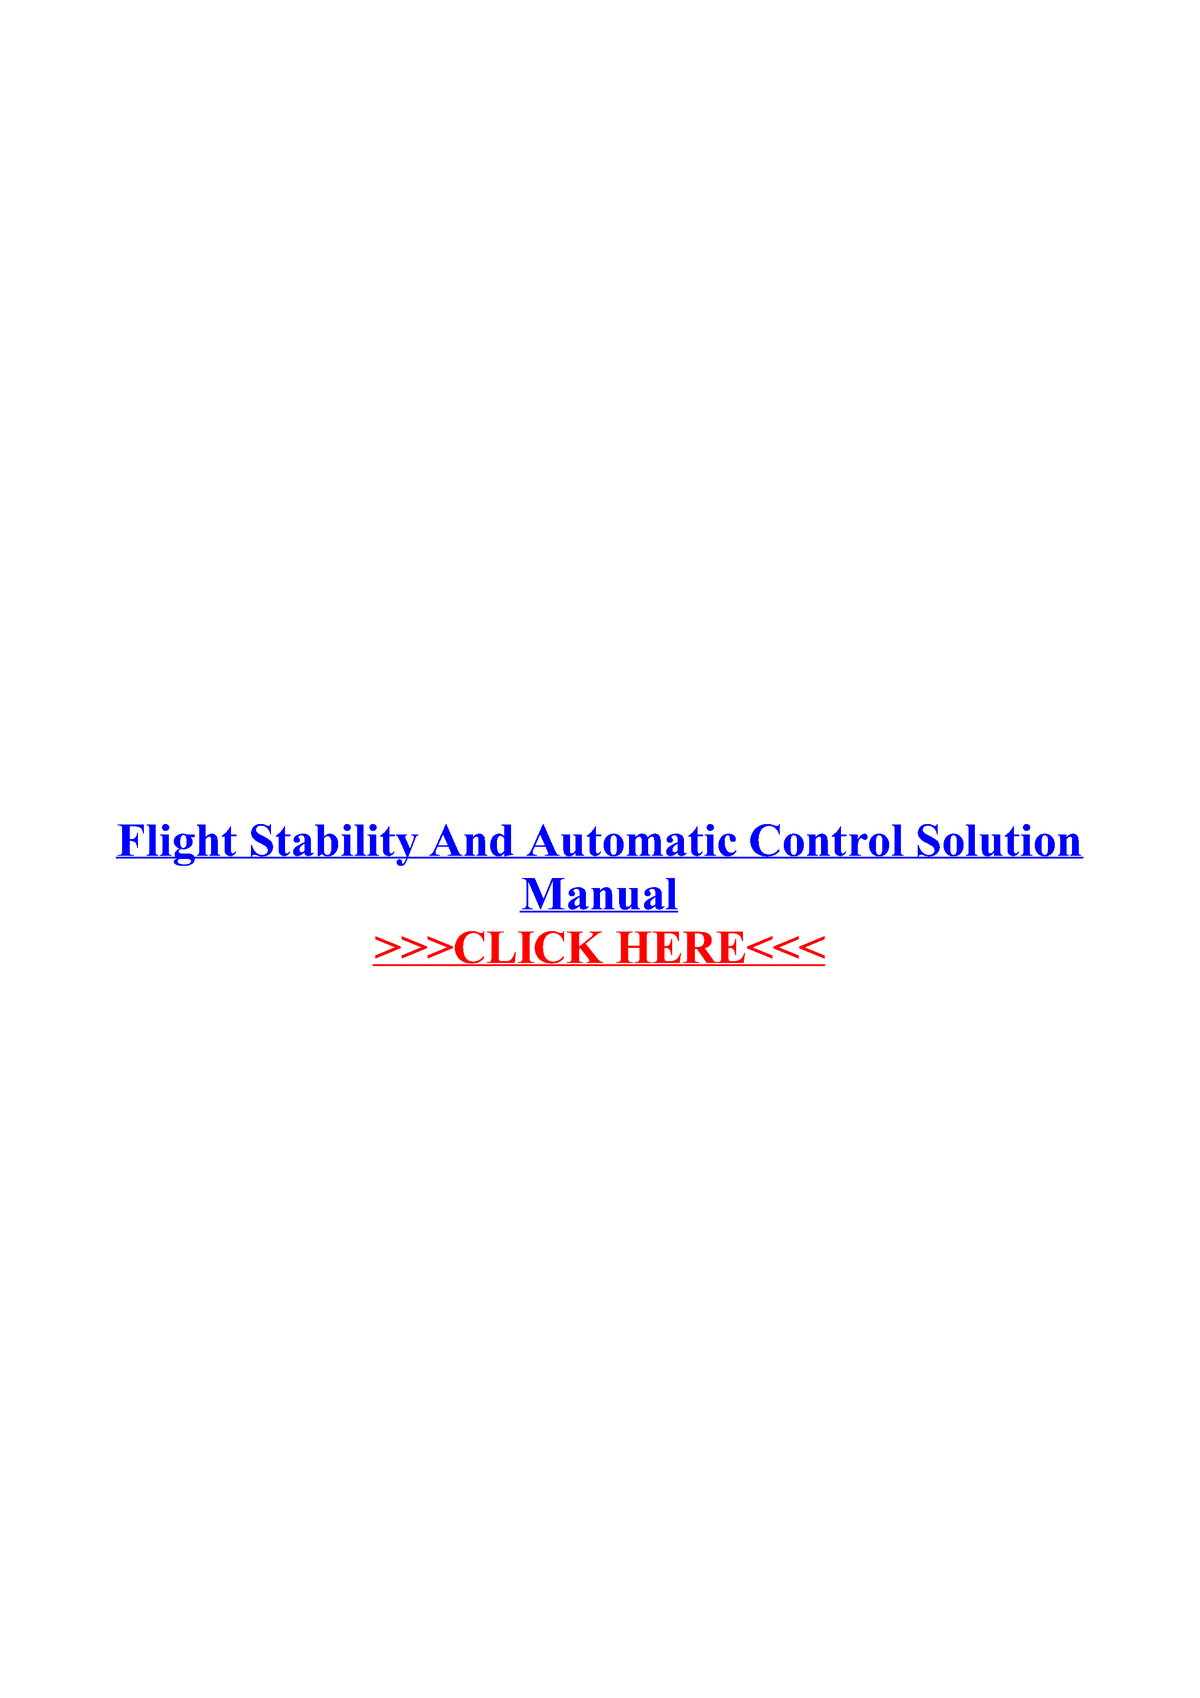 Flight stability and automatic control solution manual StuDocu